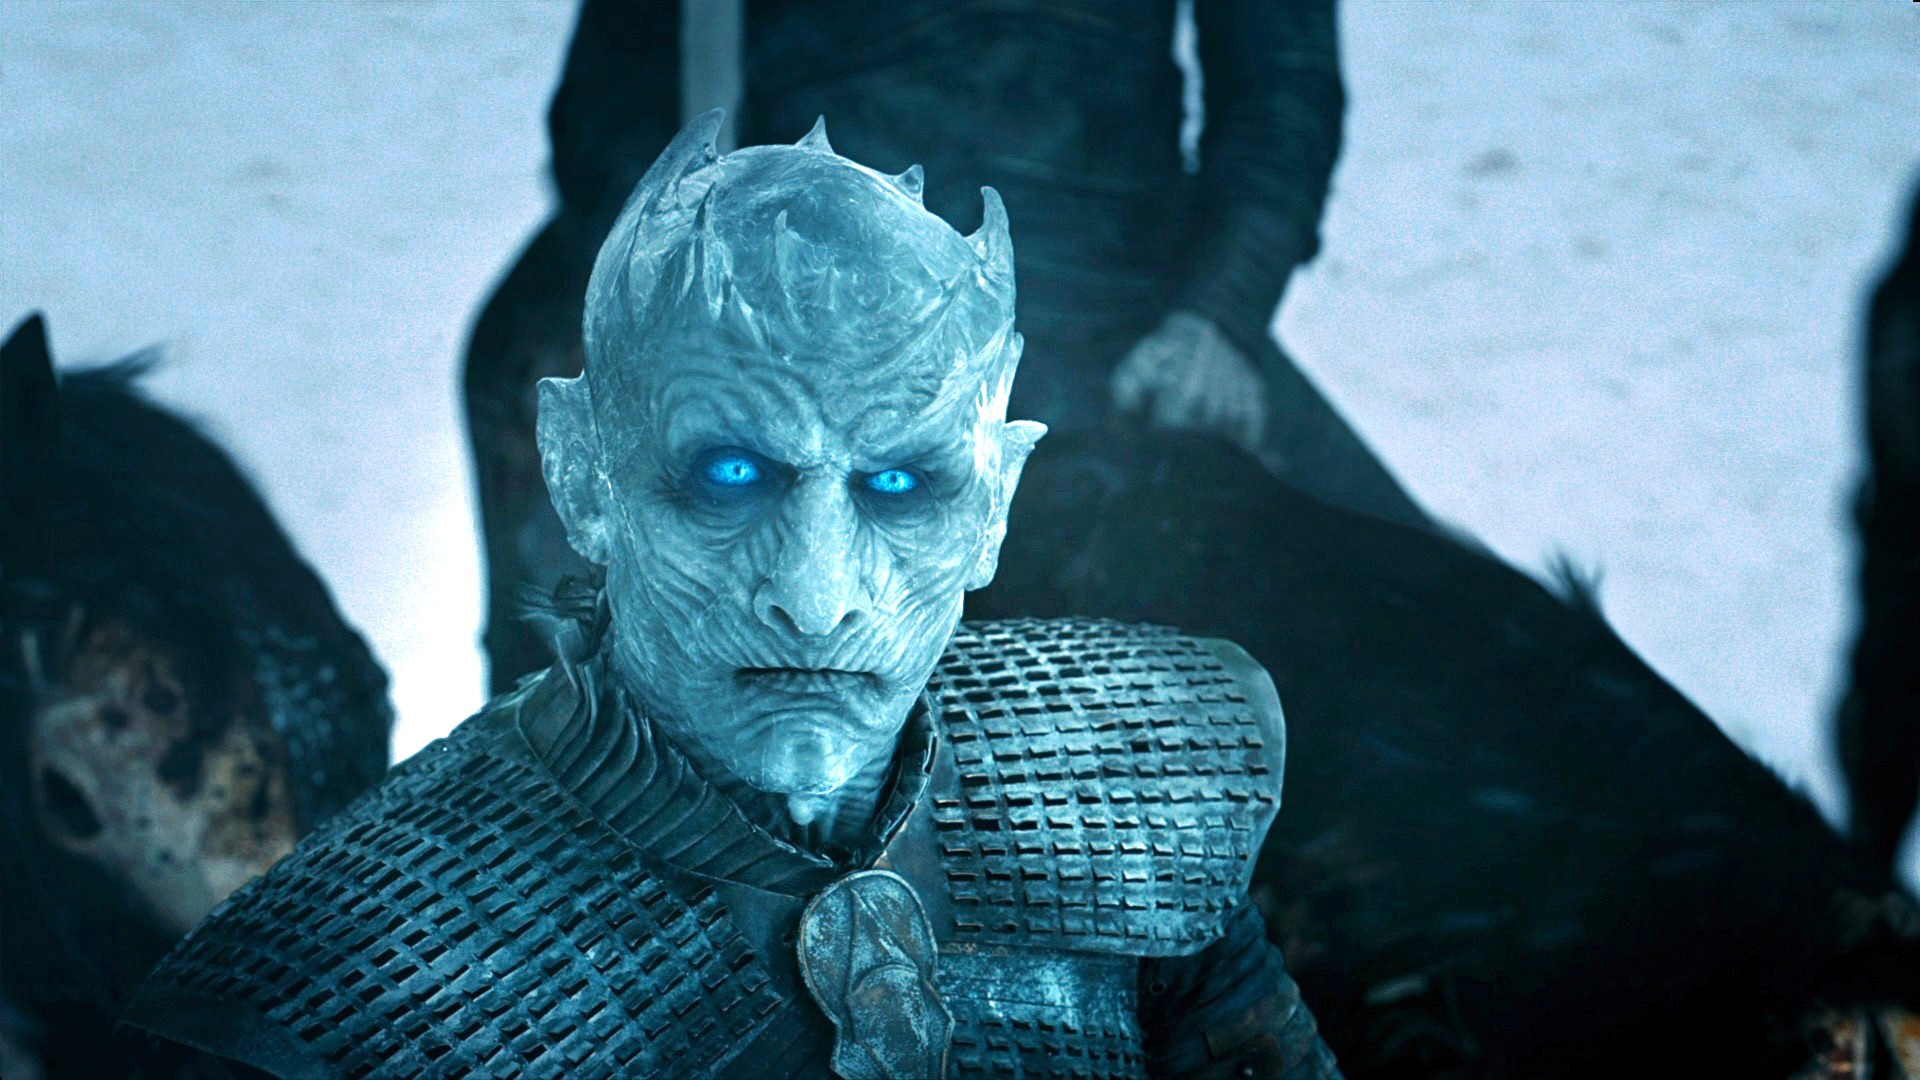 Game of Thrones Night King Wallpaper HD with high-resolution 1920x1080 pixel. You can use this poster wallpaper for your Desktop Computers, Mac Screensavers, Windows Backgrounds, iPhone Wallpapers, Tablet or Android Lock screen and another Mobile device